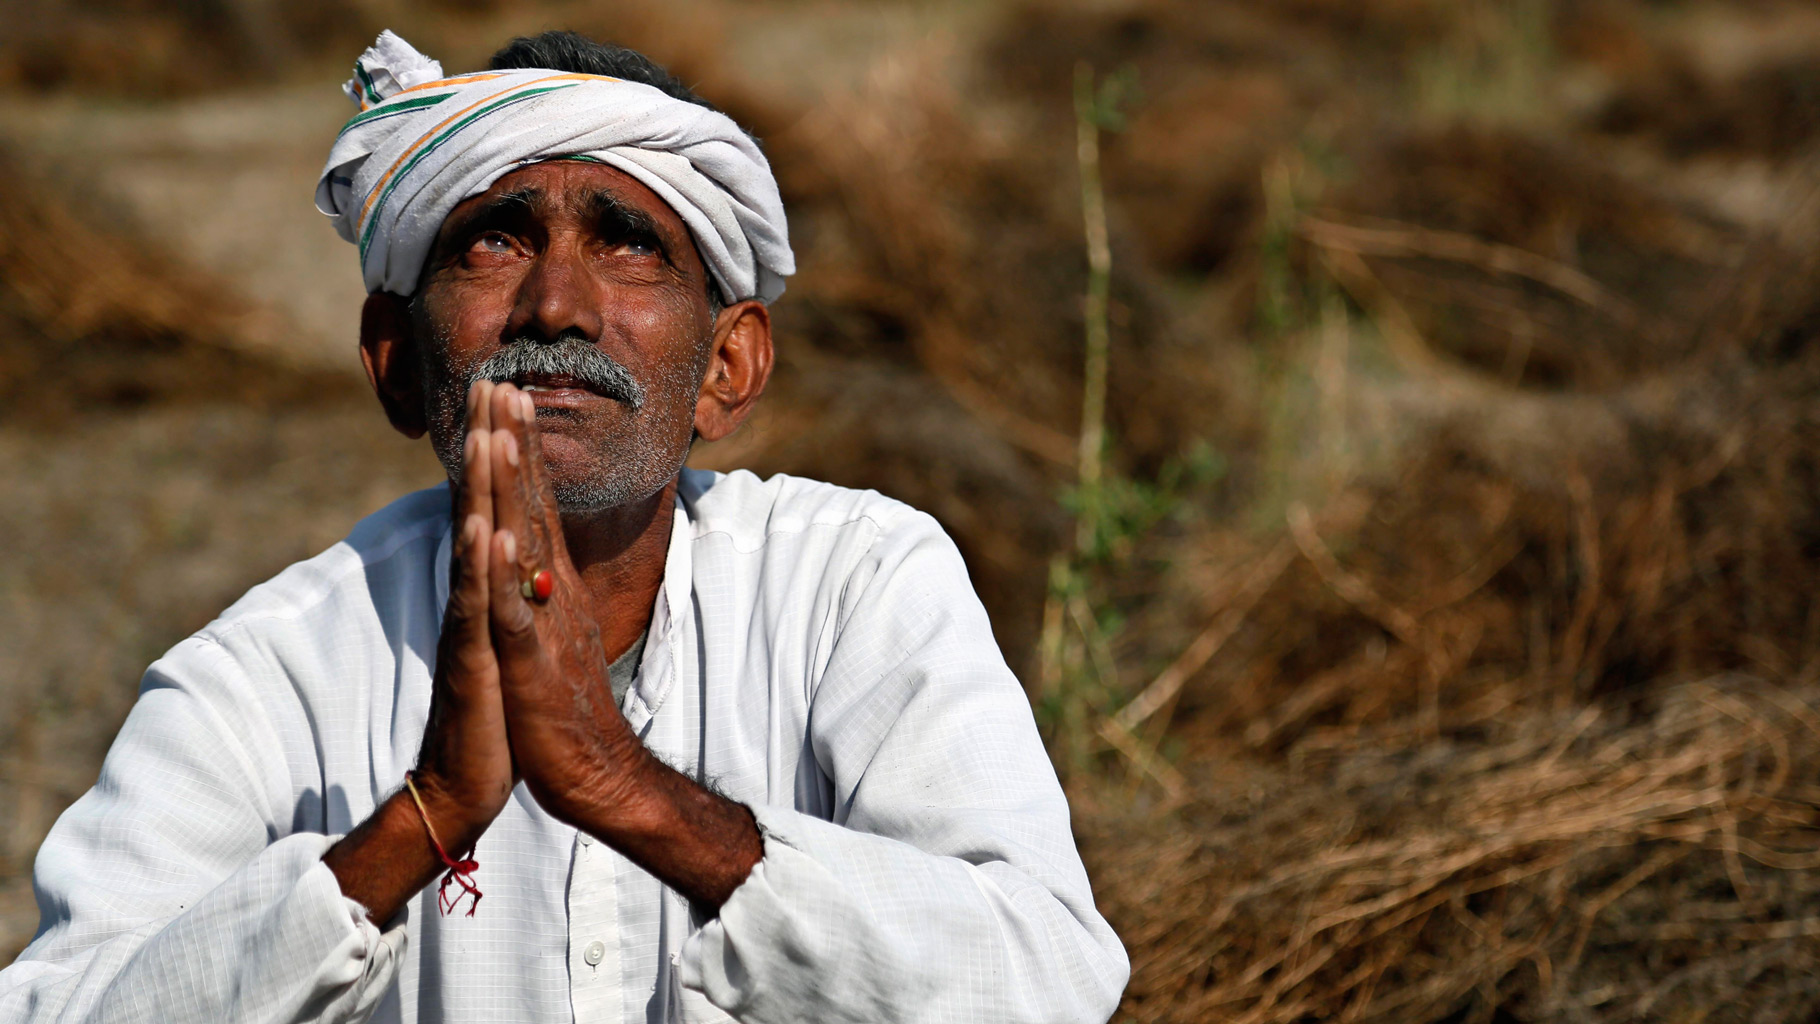 The plight of Farmers in India is depleting the roots of the nation